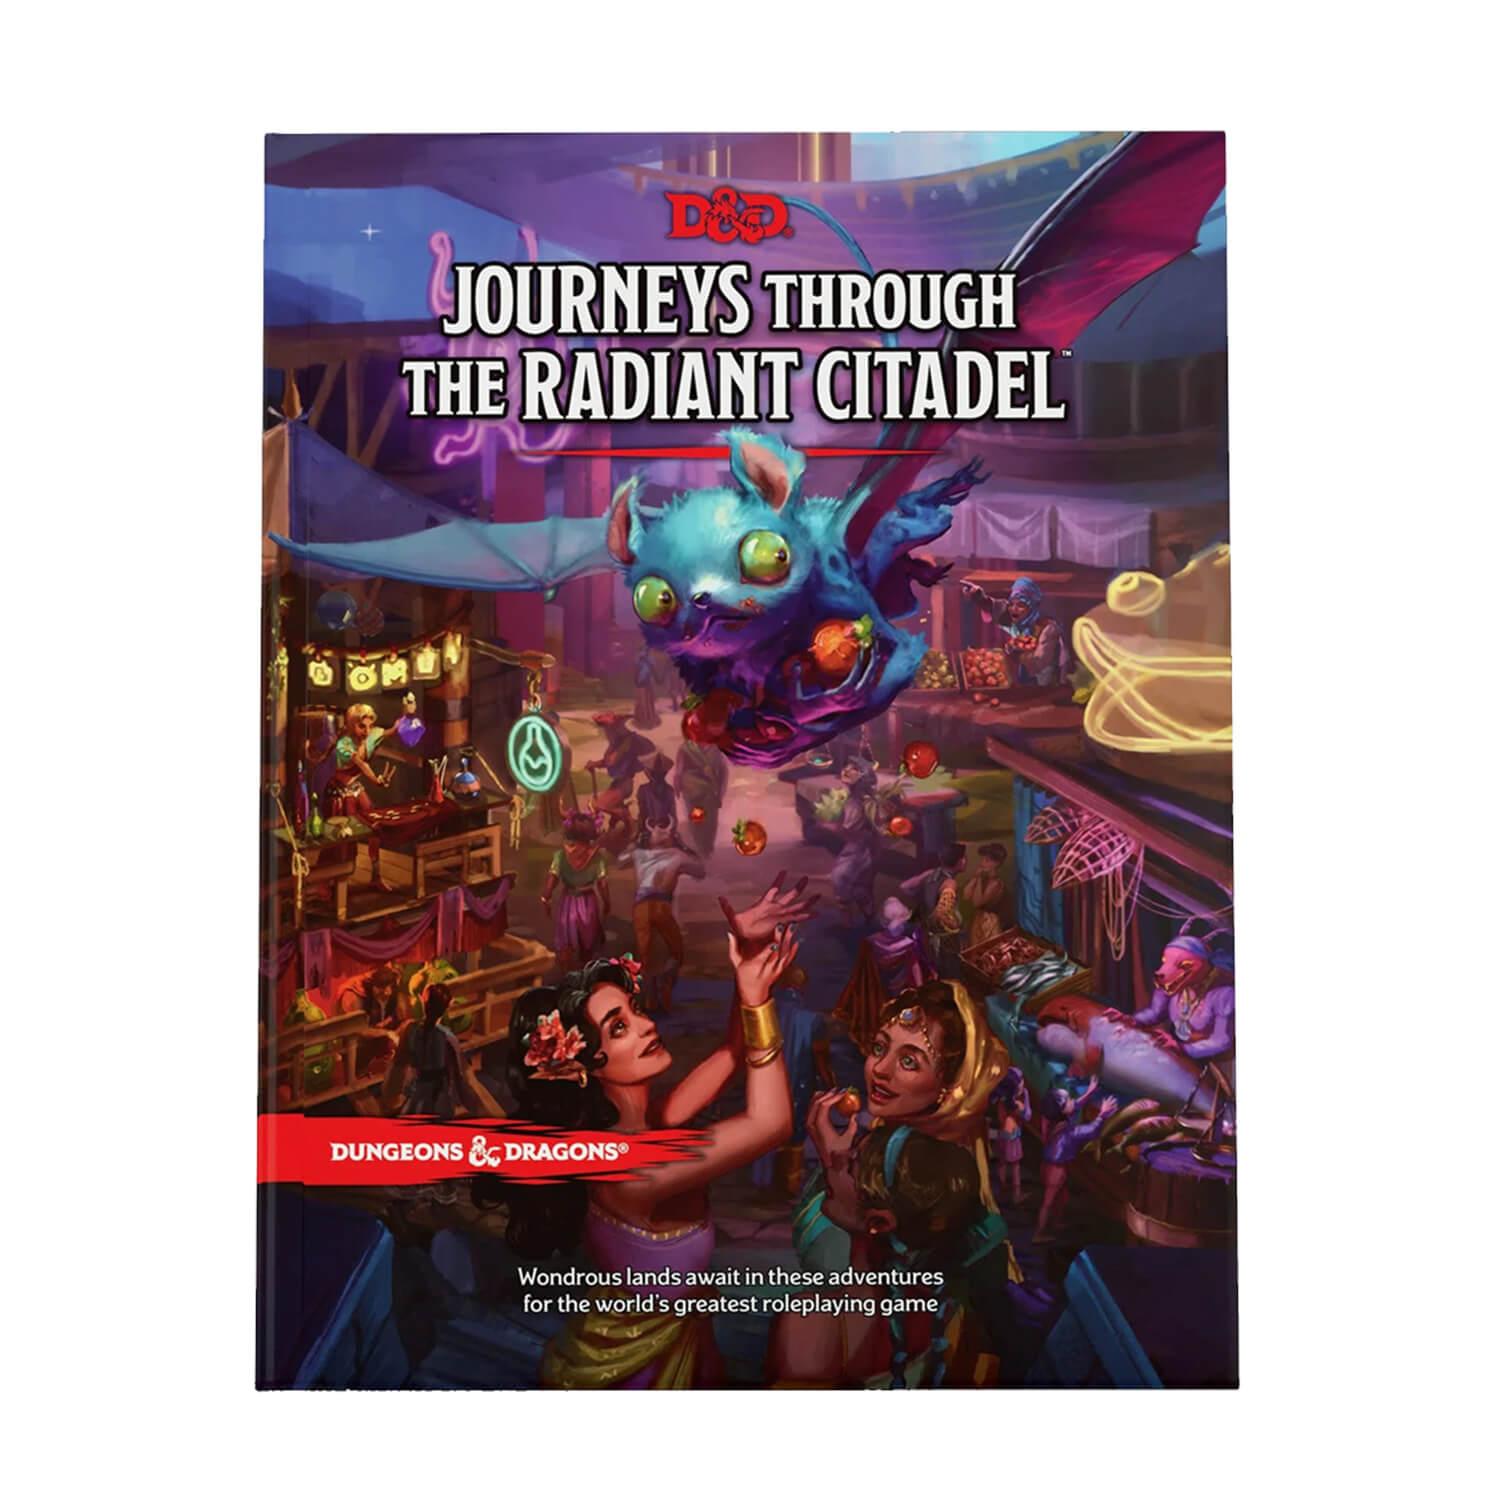 Dungeons & Dragons Journey through the Radiant Citadel (Standard Cover)